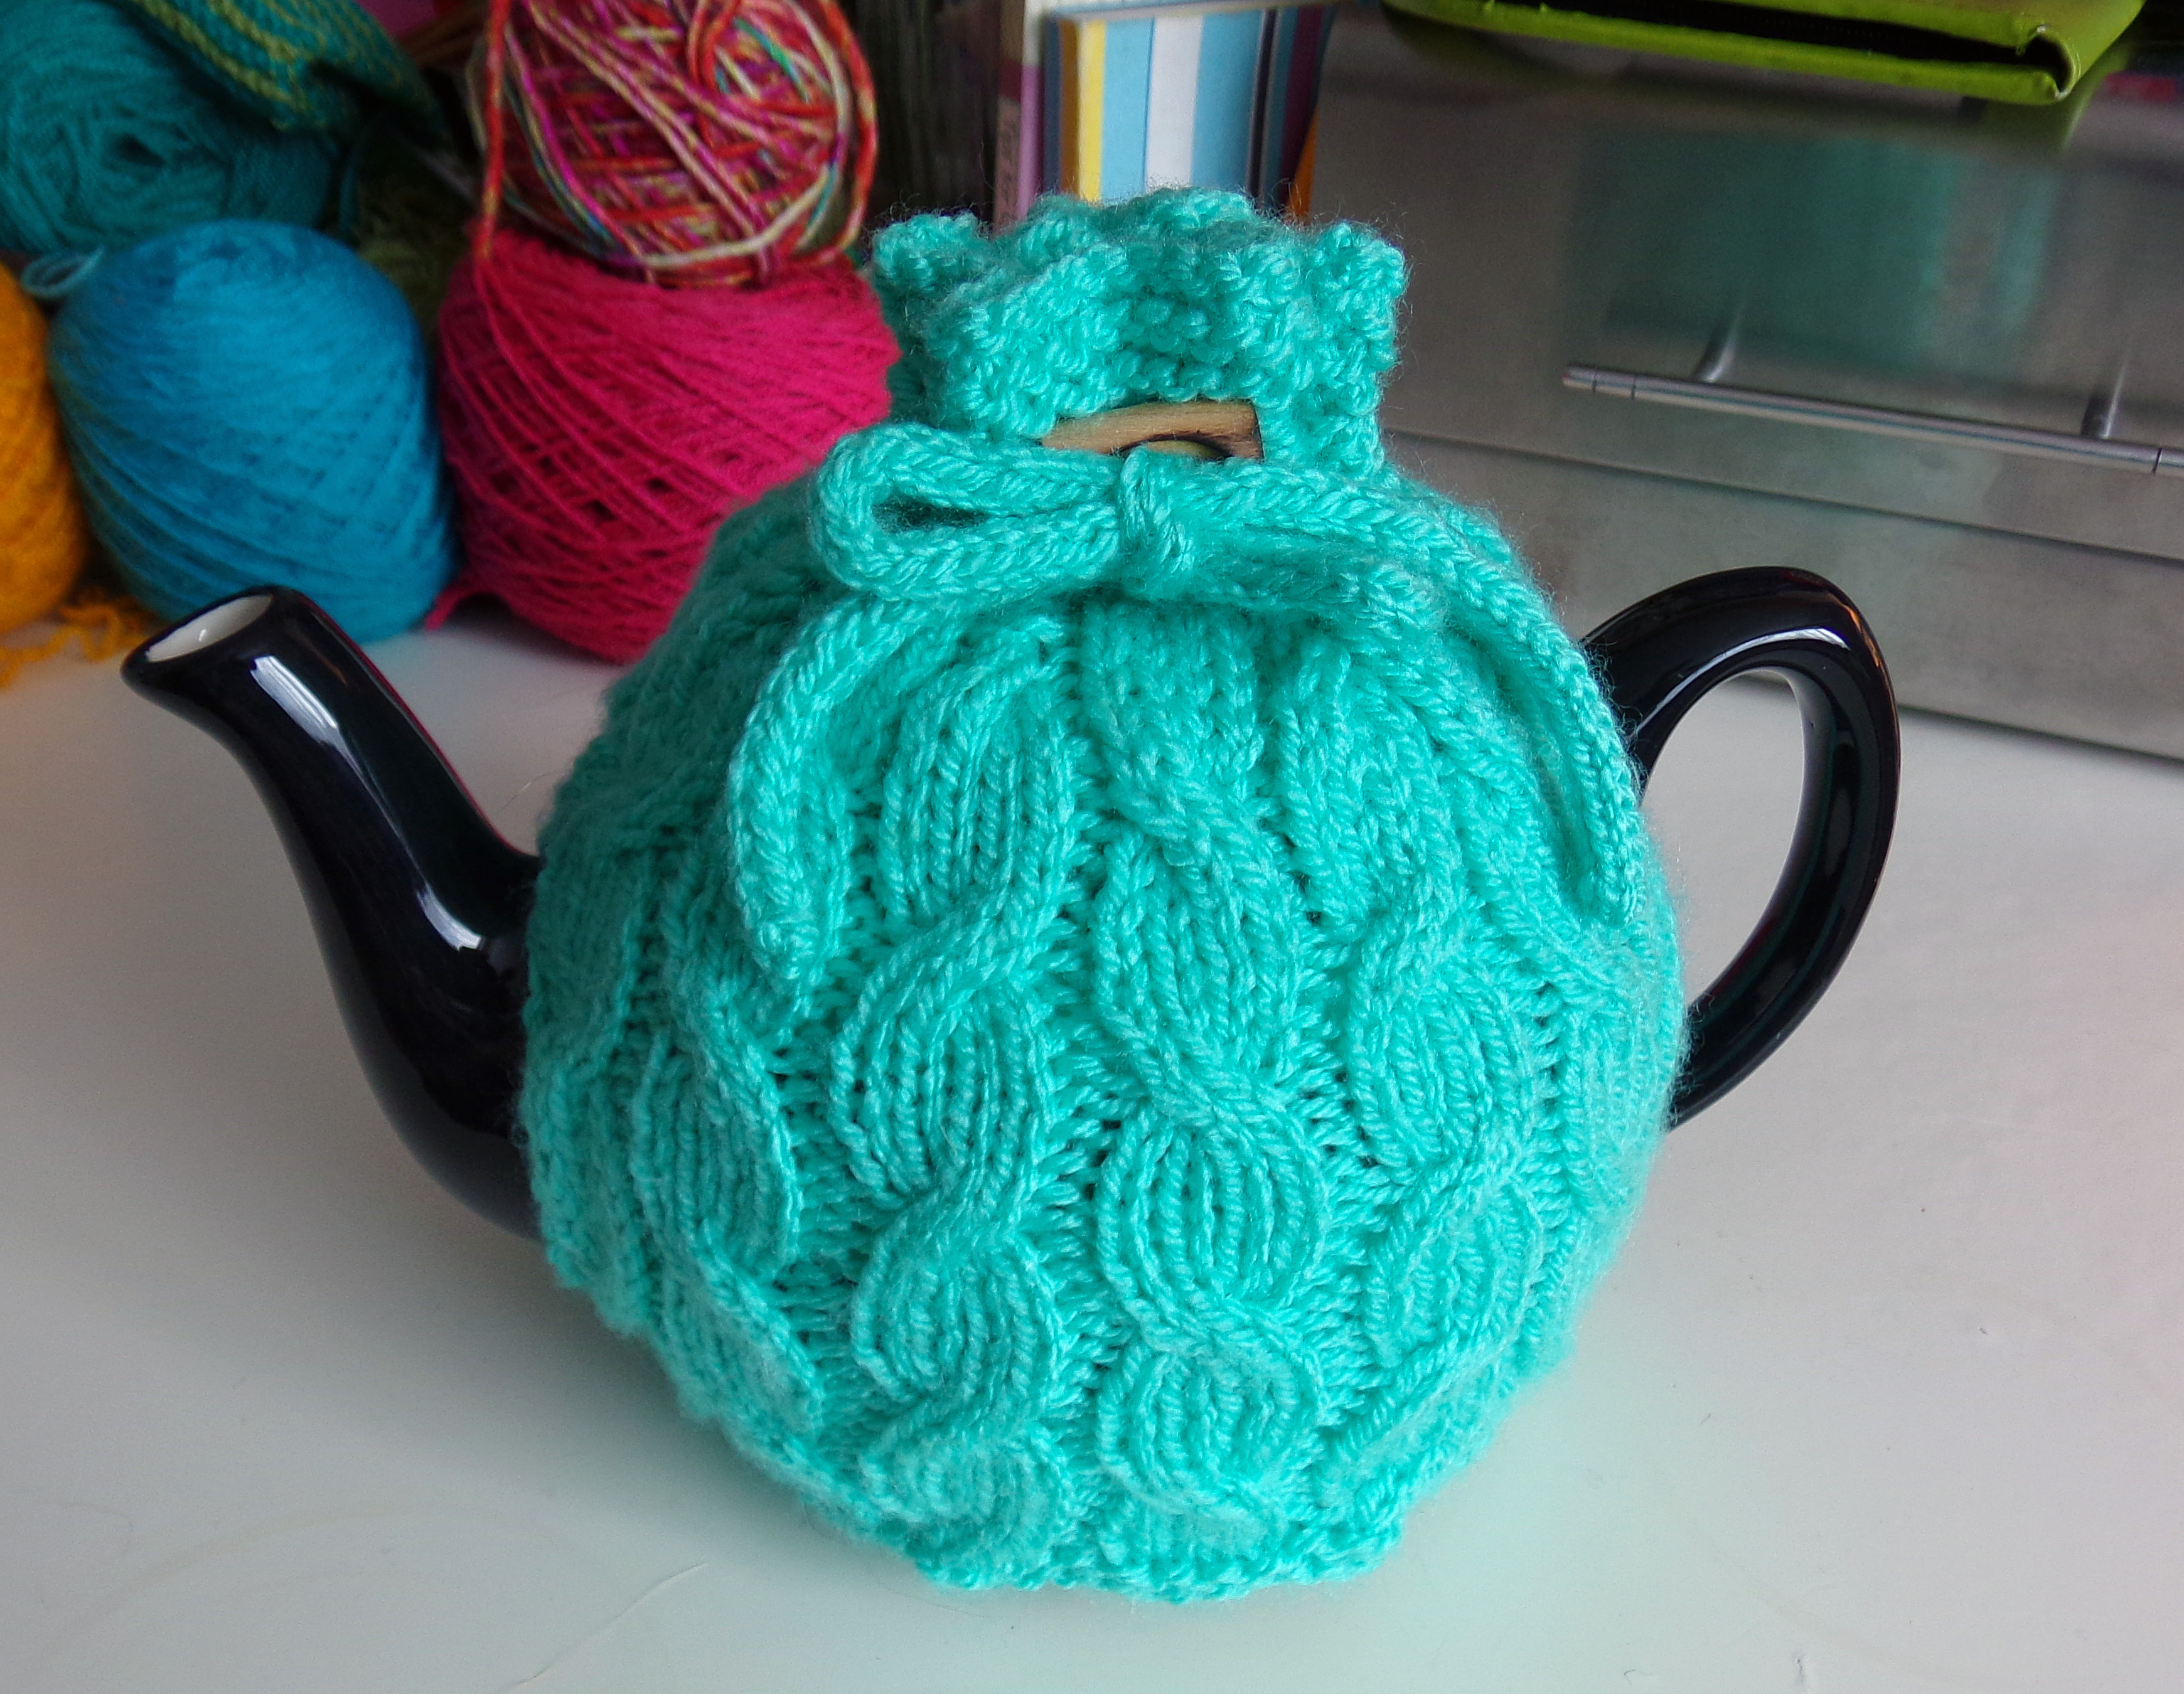 Tea Cozy Patterns To Knit Three Free Tea Cosy Patterns Reviewed Or Why Tea Pots Are Better